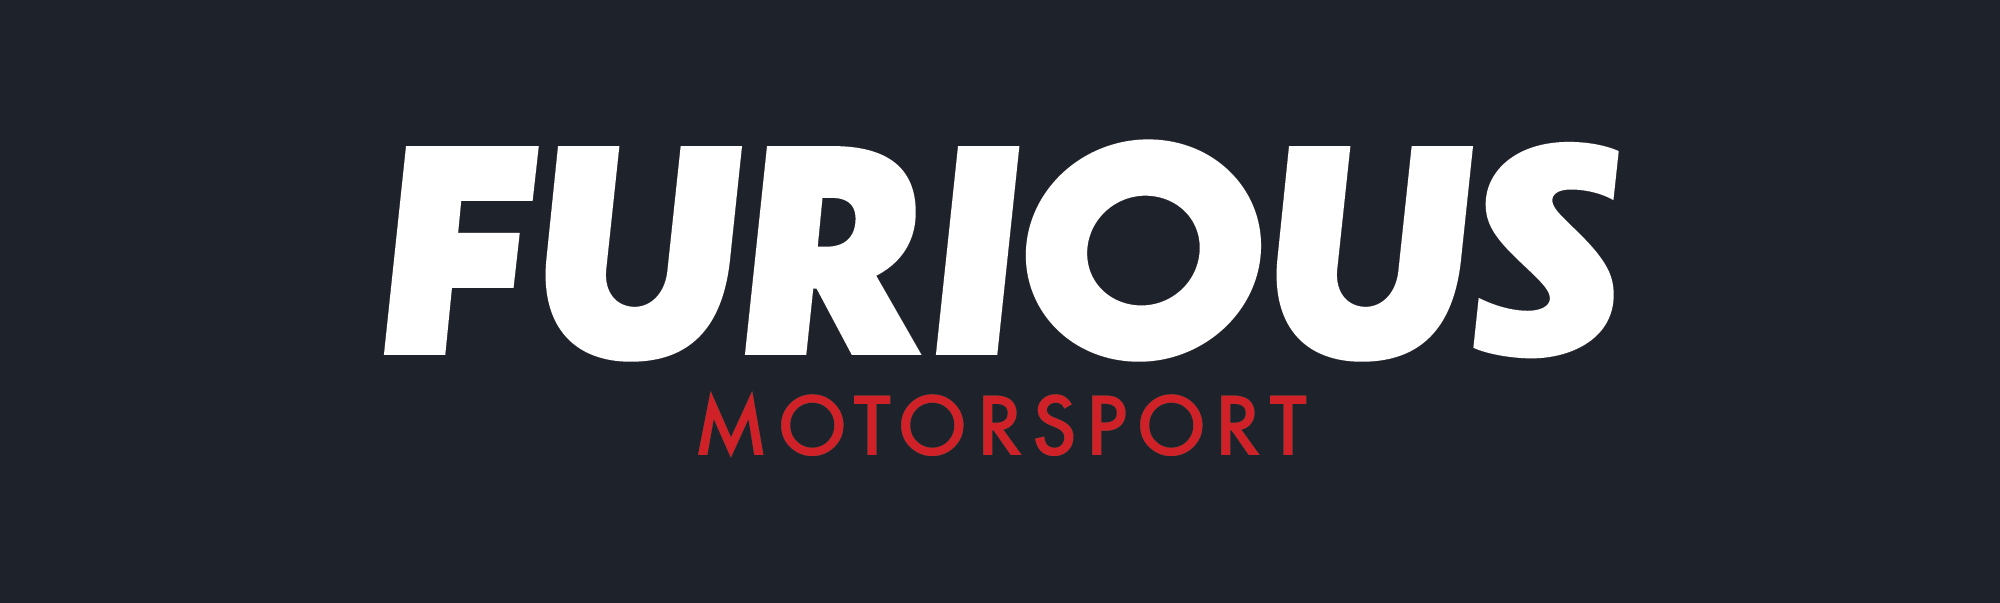 Clearance – Furious Motorsport